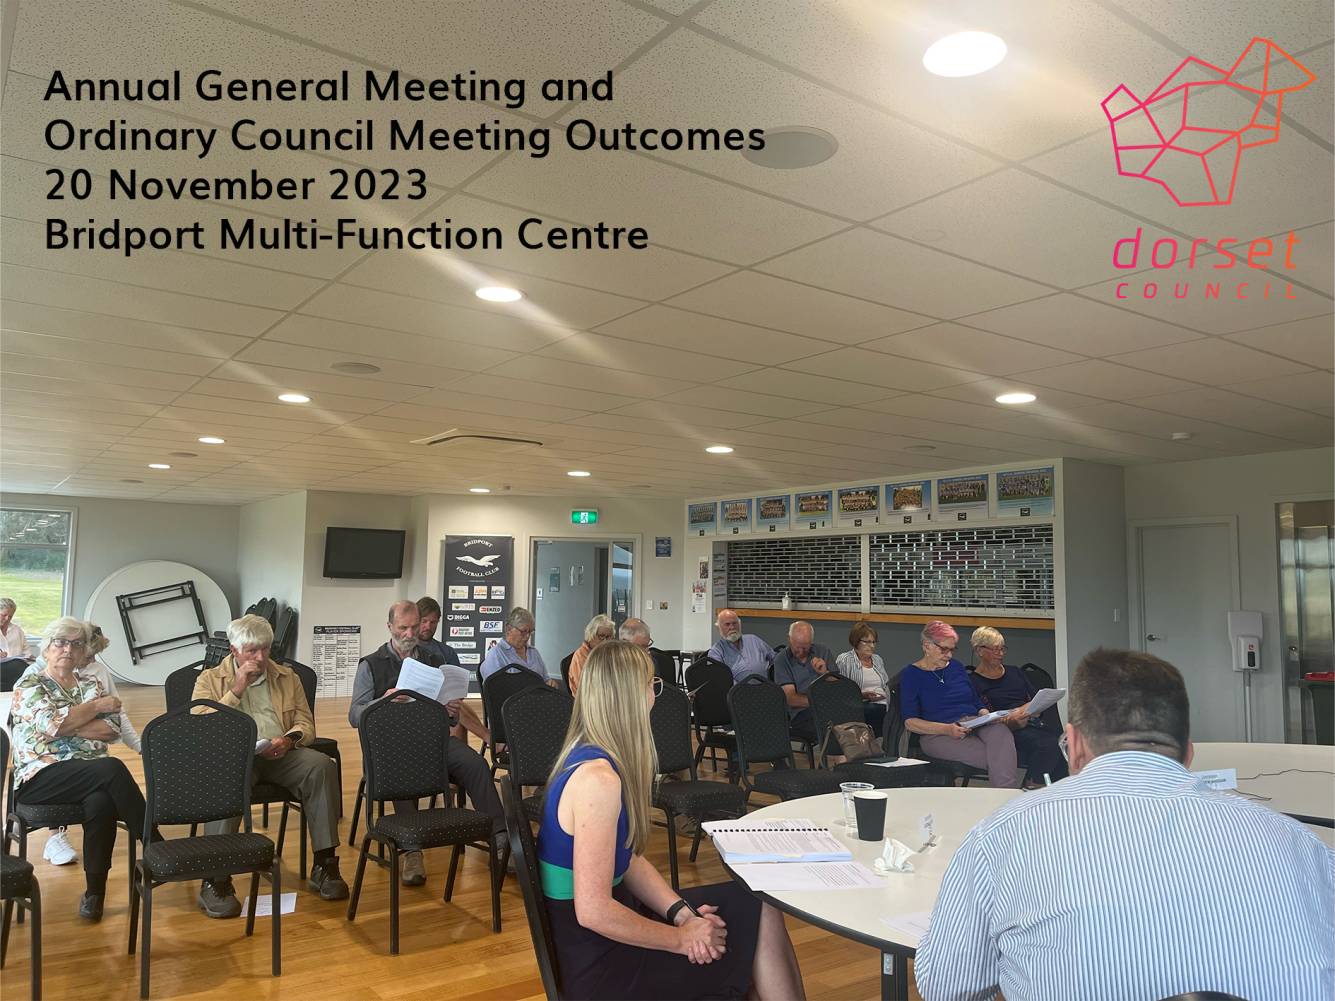 Briefing of Decisions | 20 November 2023 Council Meeting